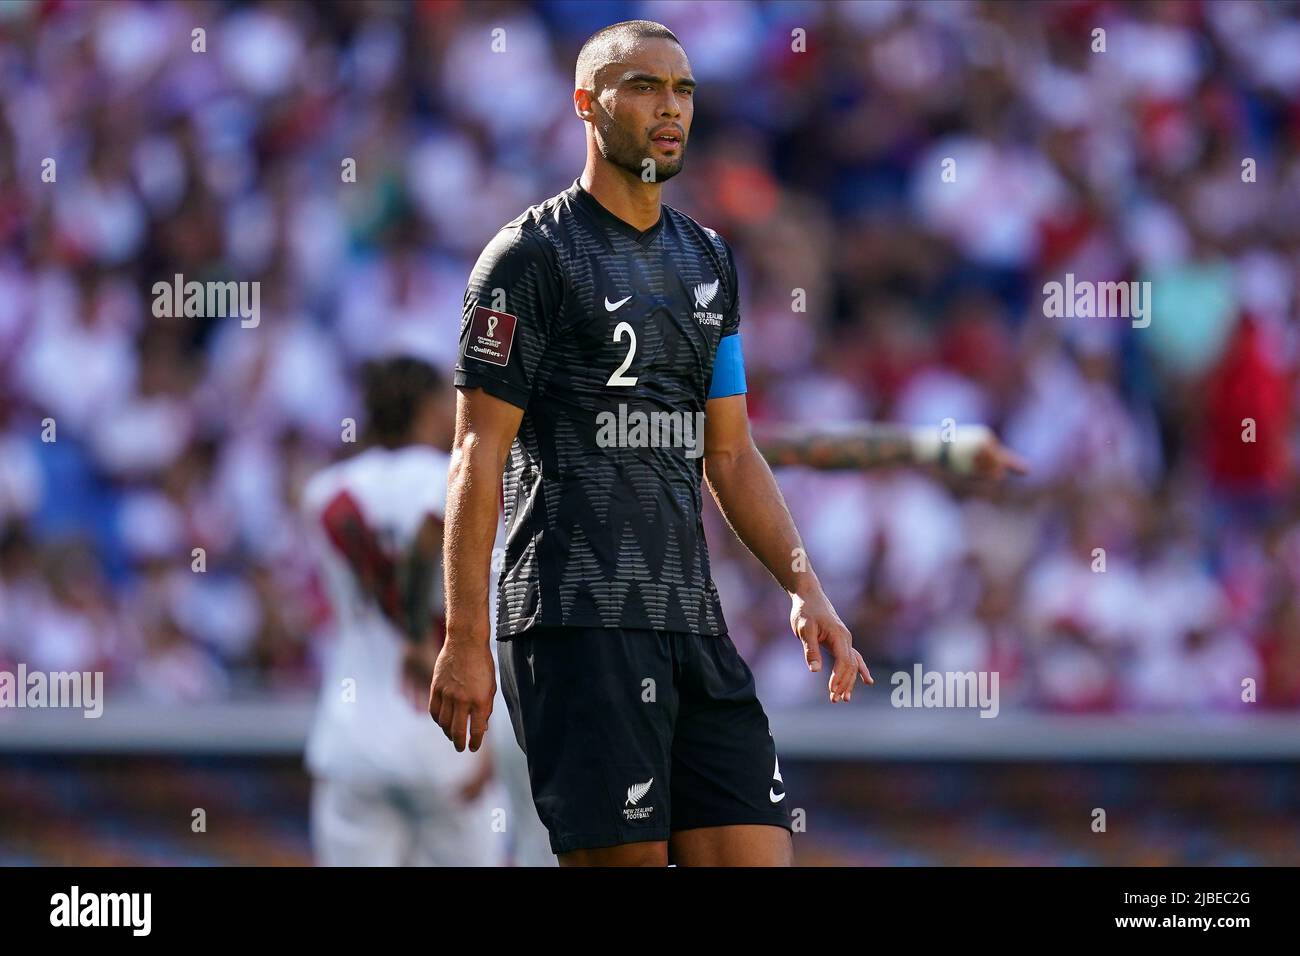 Barcelona, Spain. June 5, 2022, Winston Reid of New Zealand during the friendly match between Peru and New Zealand played at RCDE Stadium on June 5, 2022 in Barcelona, Spain. (Photo by Bagu Blanco / PRESSINPHOTO) Stock Photo